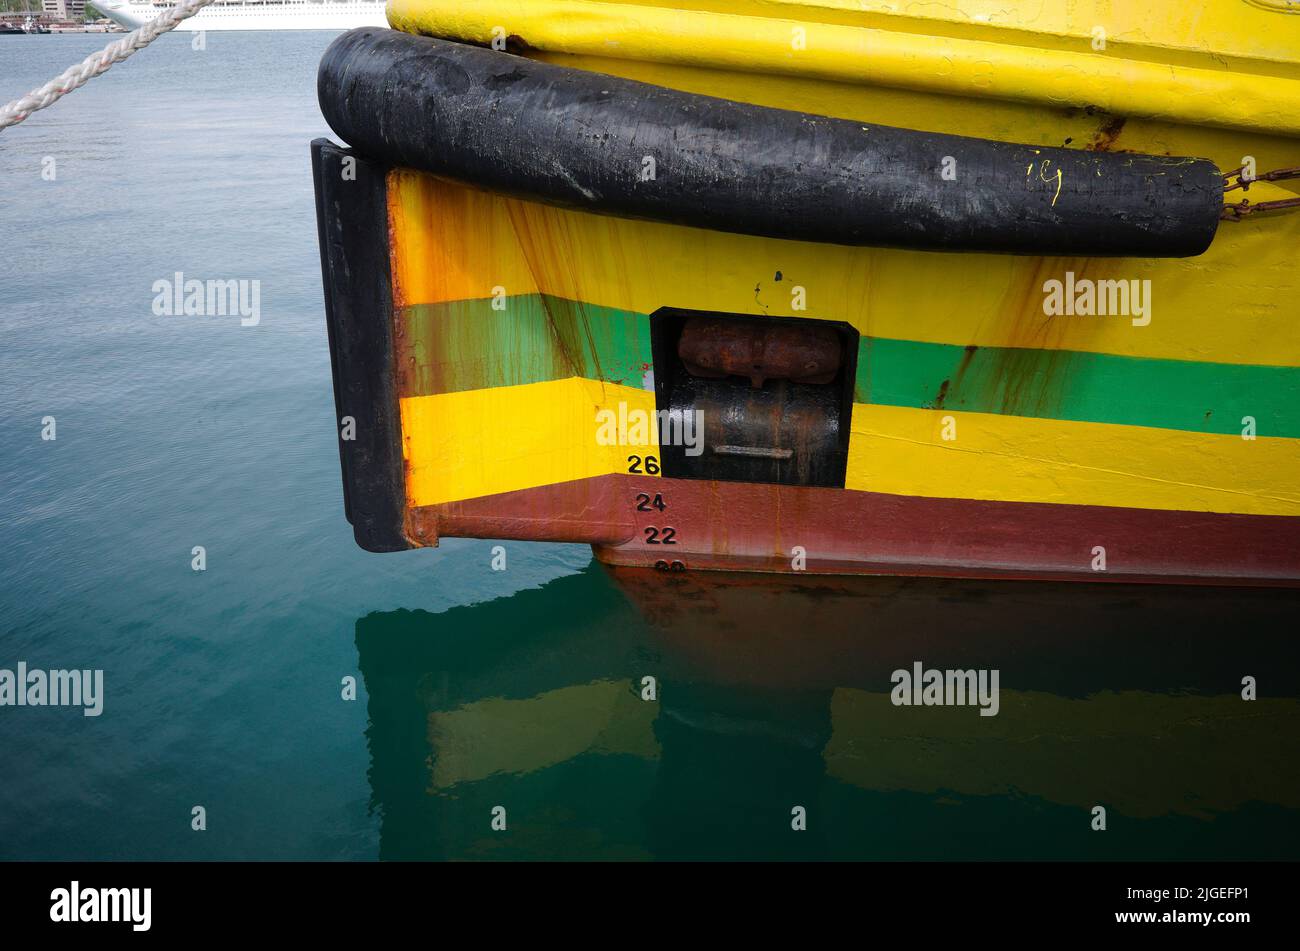 Bow of yellow boat with waterline, fairlead, raised anchor, rubber fender and draft marks on ship bow. Ship bow of fishing boat close-up Stock Photo